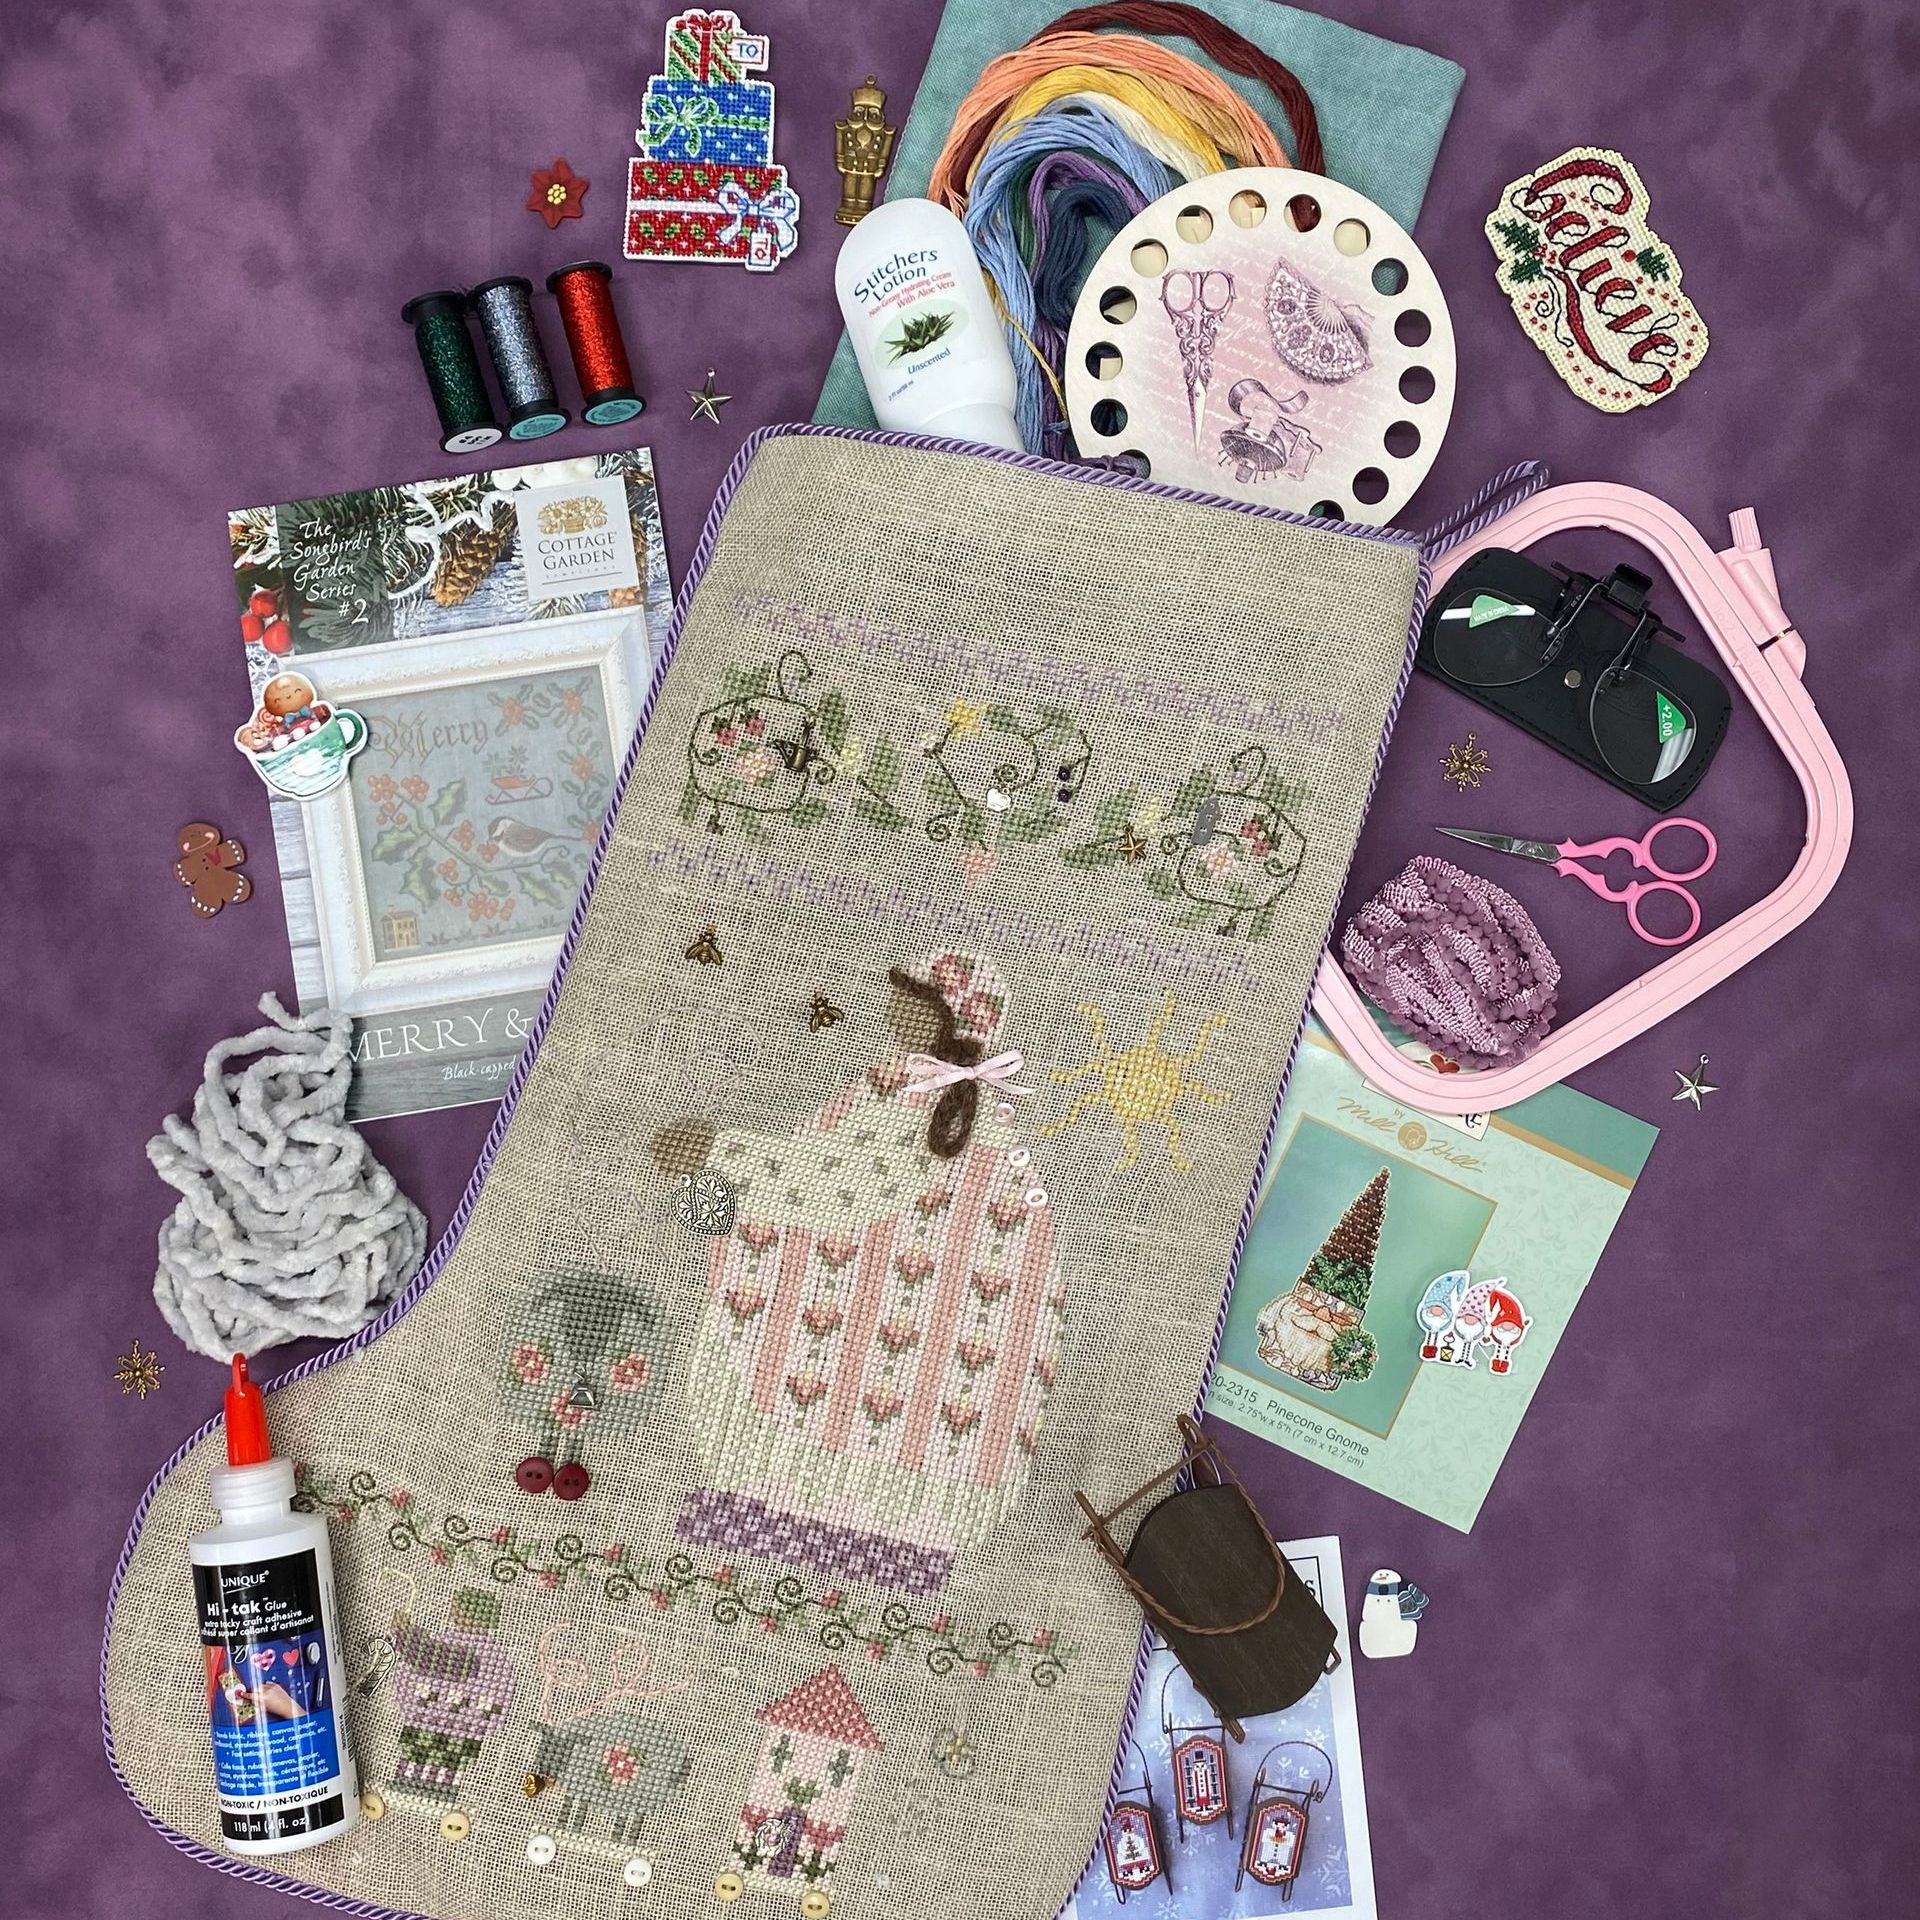 A christmas stocking is surrounded by sewing supplies on a purple surface.